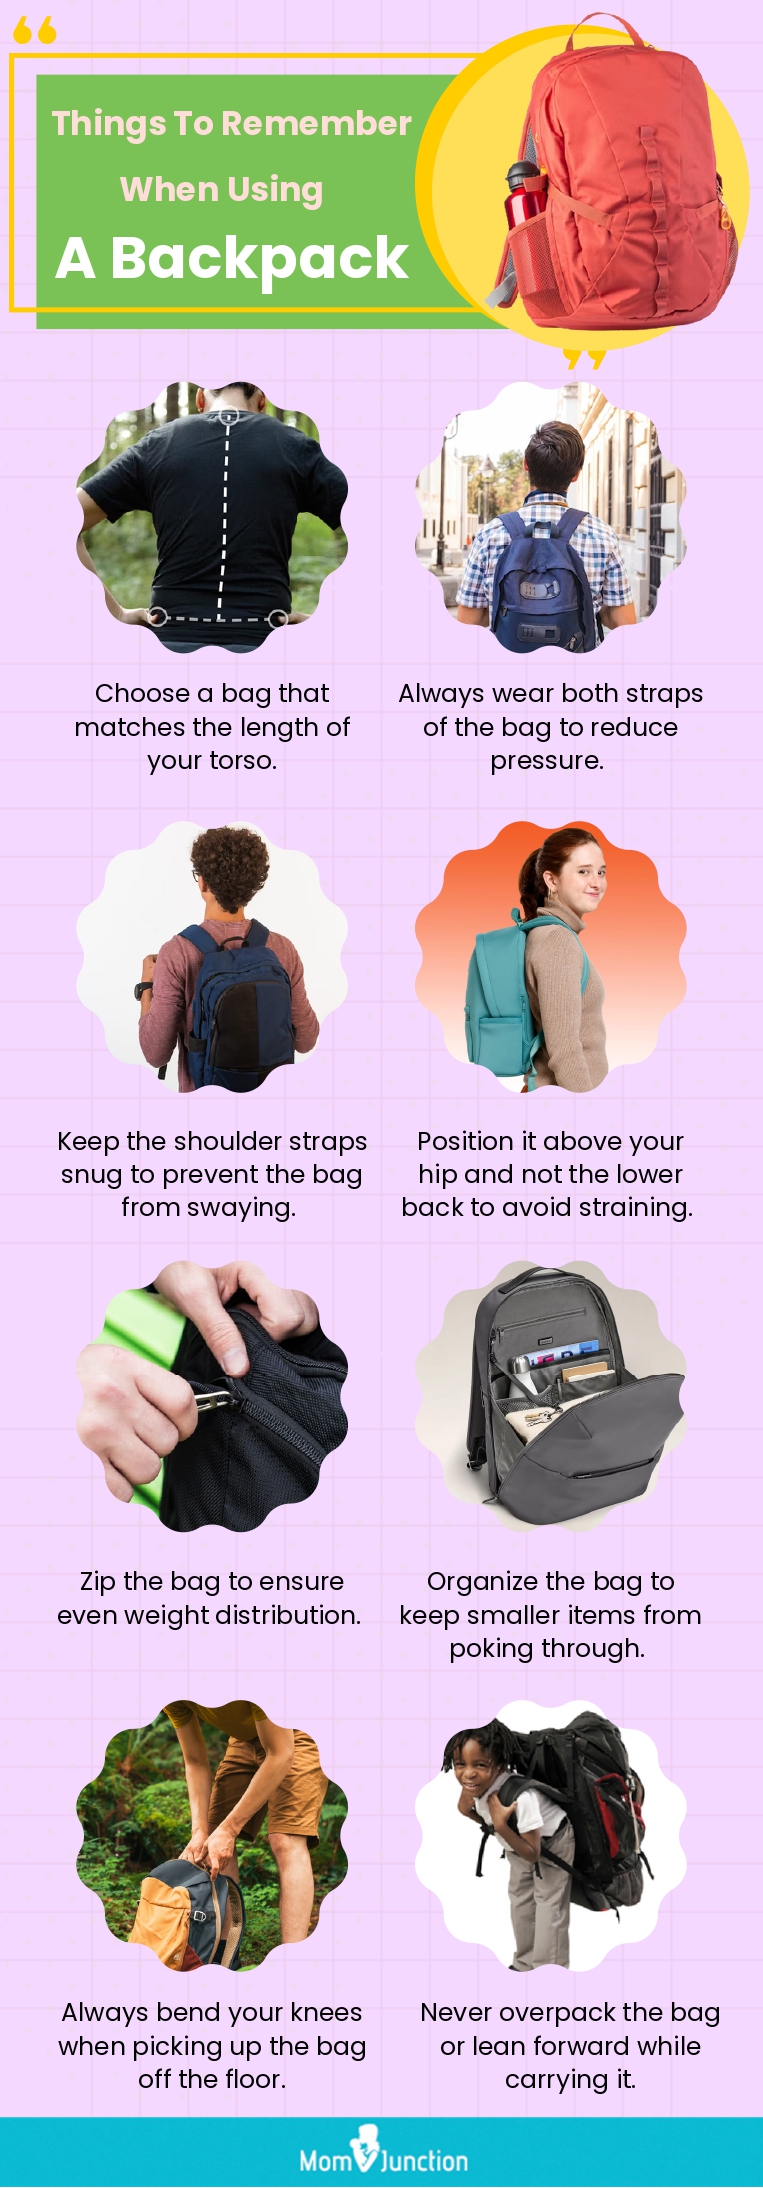 Things To Remember When Using A Backpack (infographic)